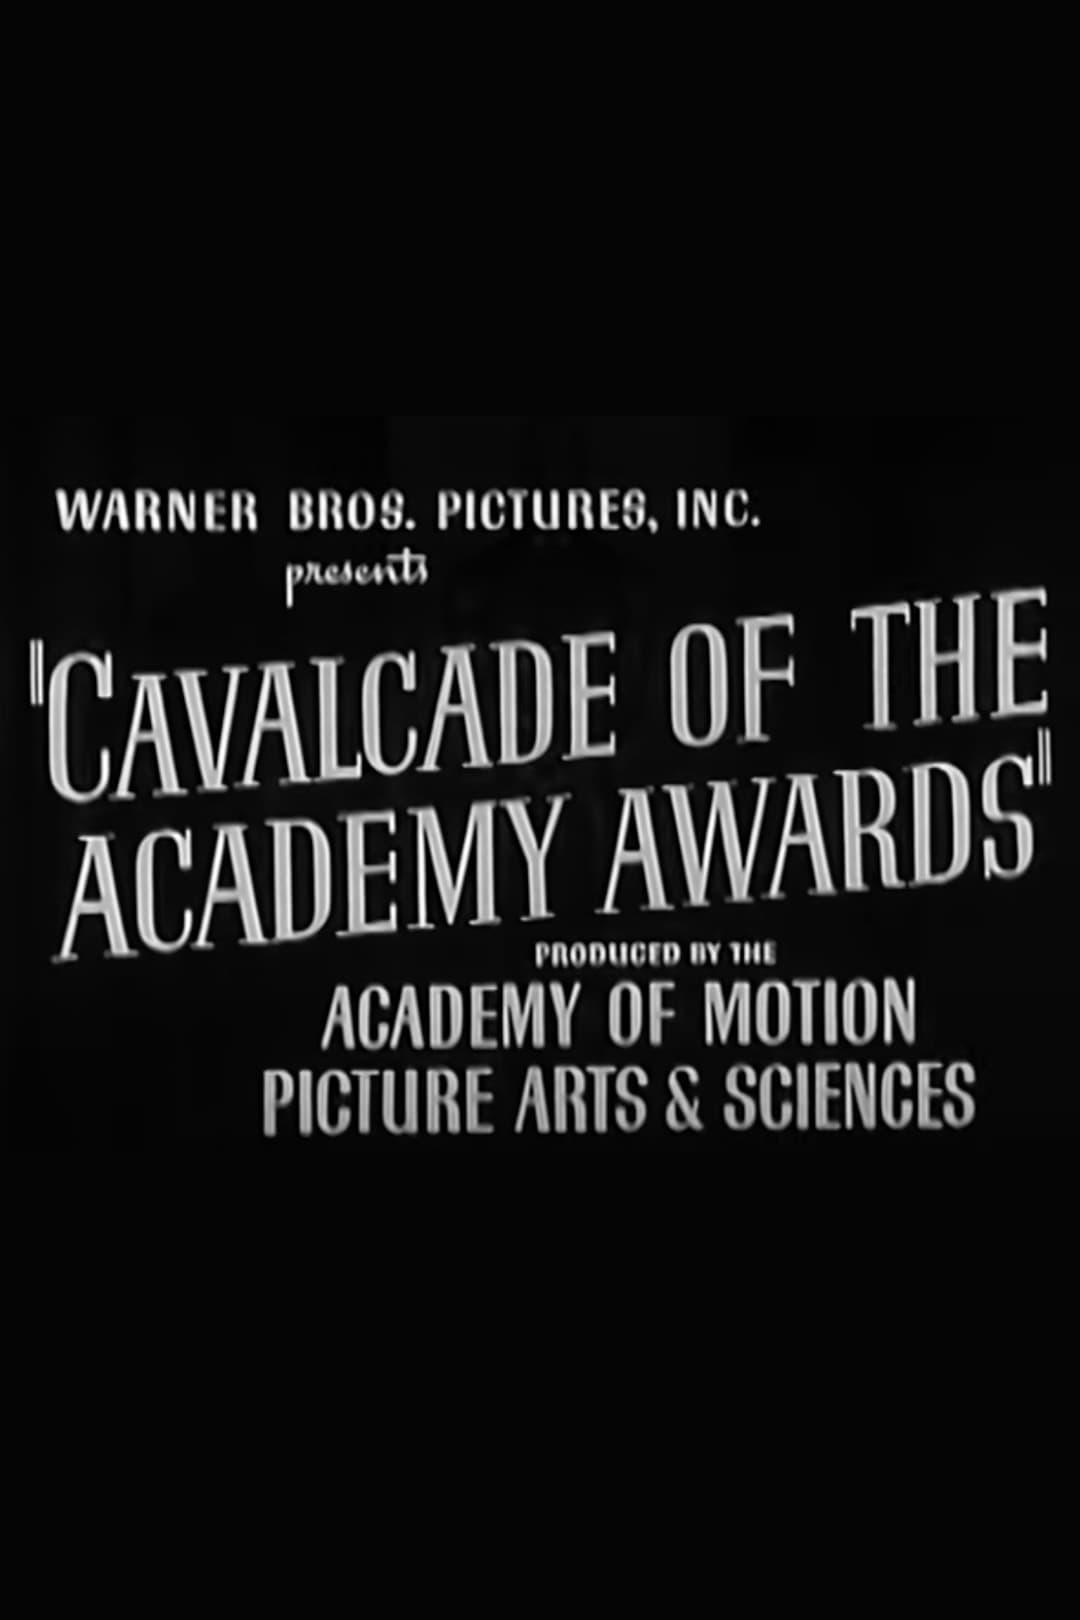 Cavalcade of the Academy Awards poster